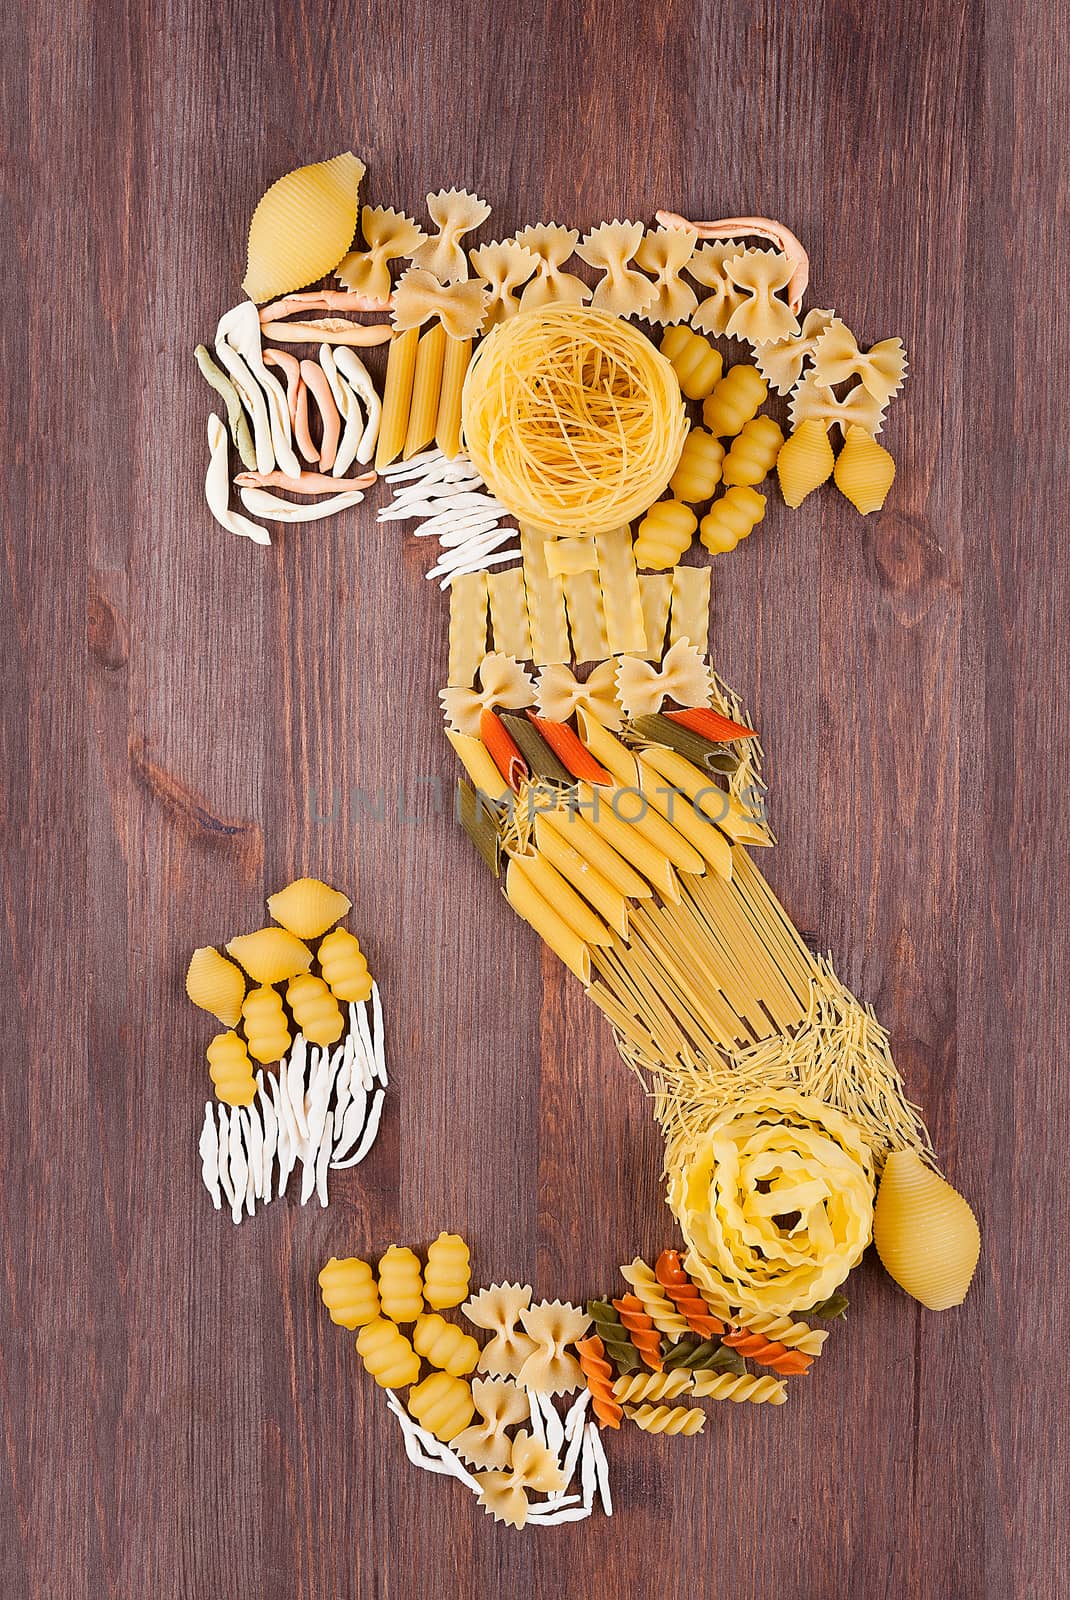 Map of Italy made of different varieties of pasta by Coffeechocolates